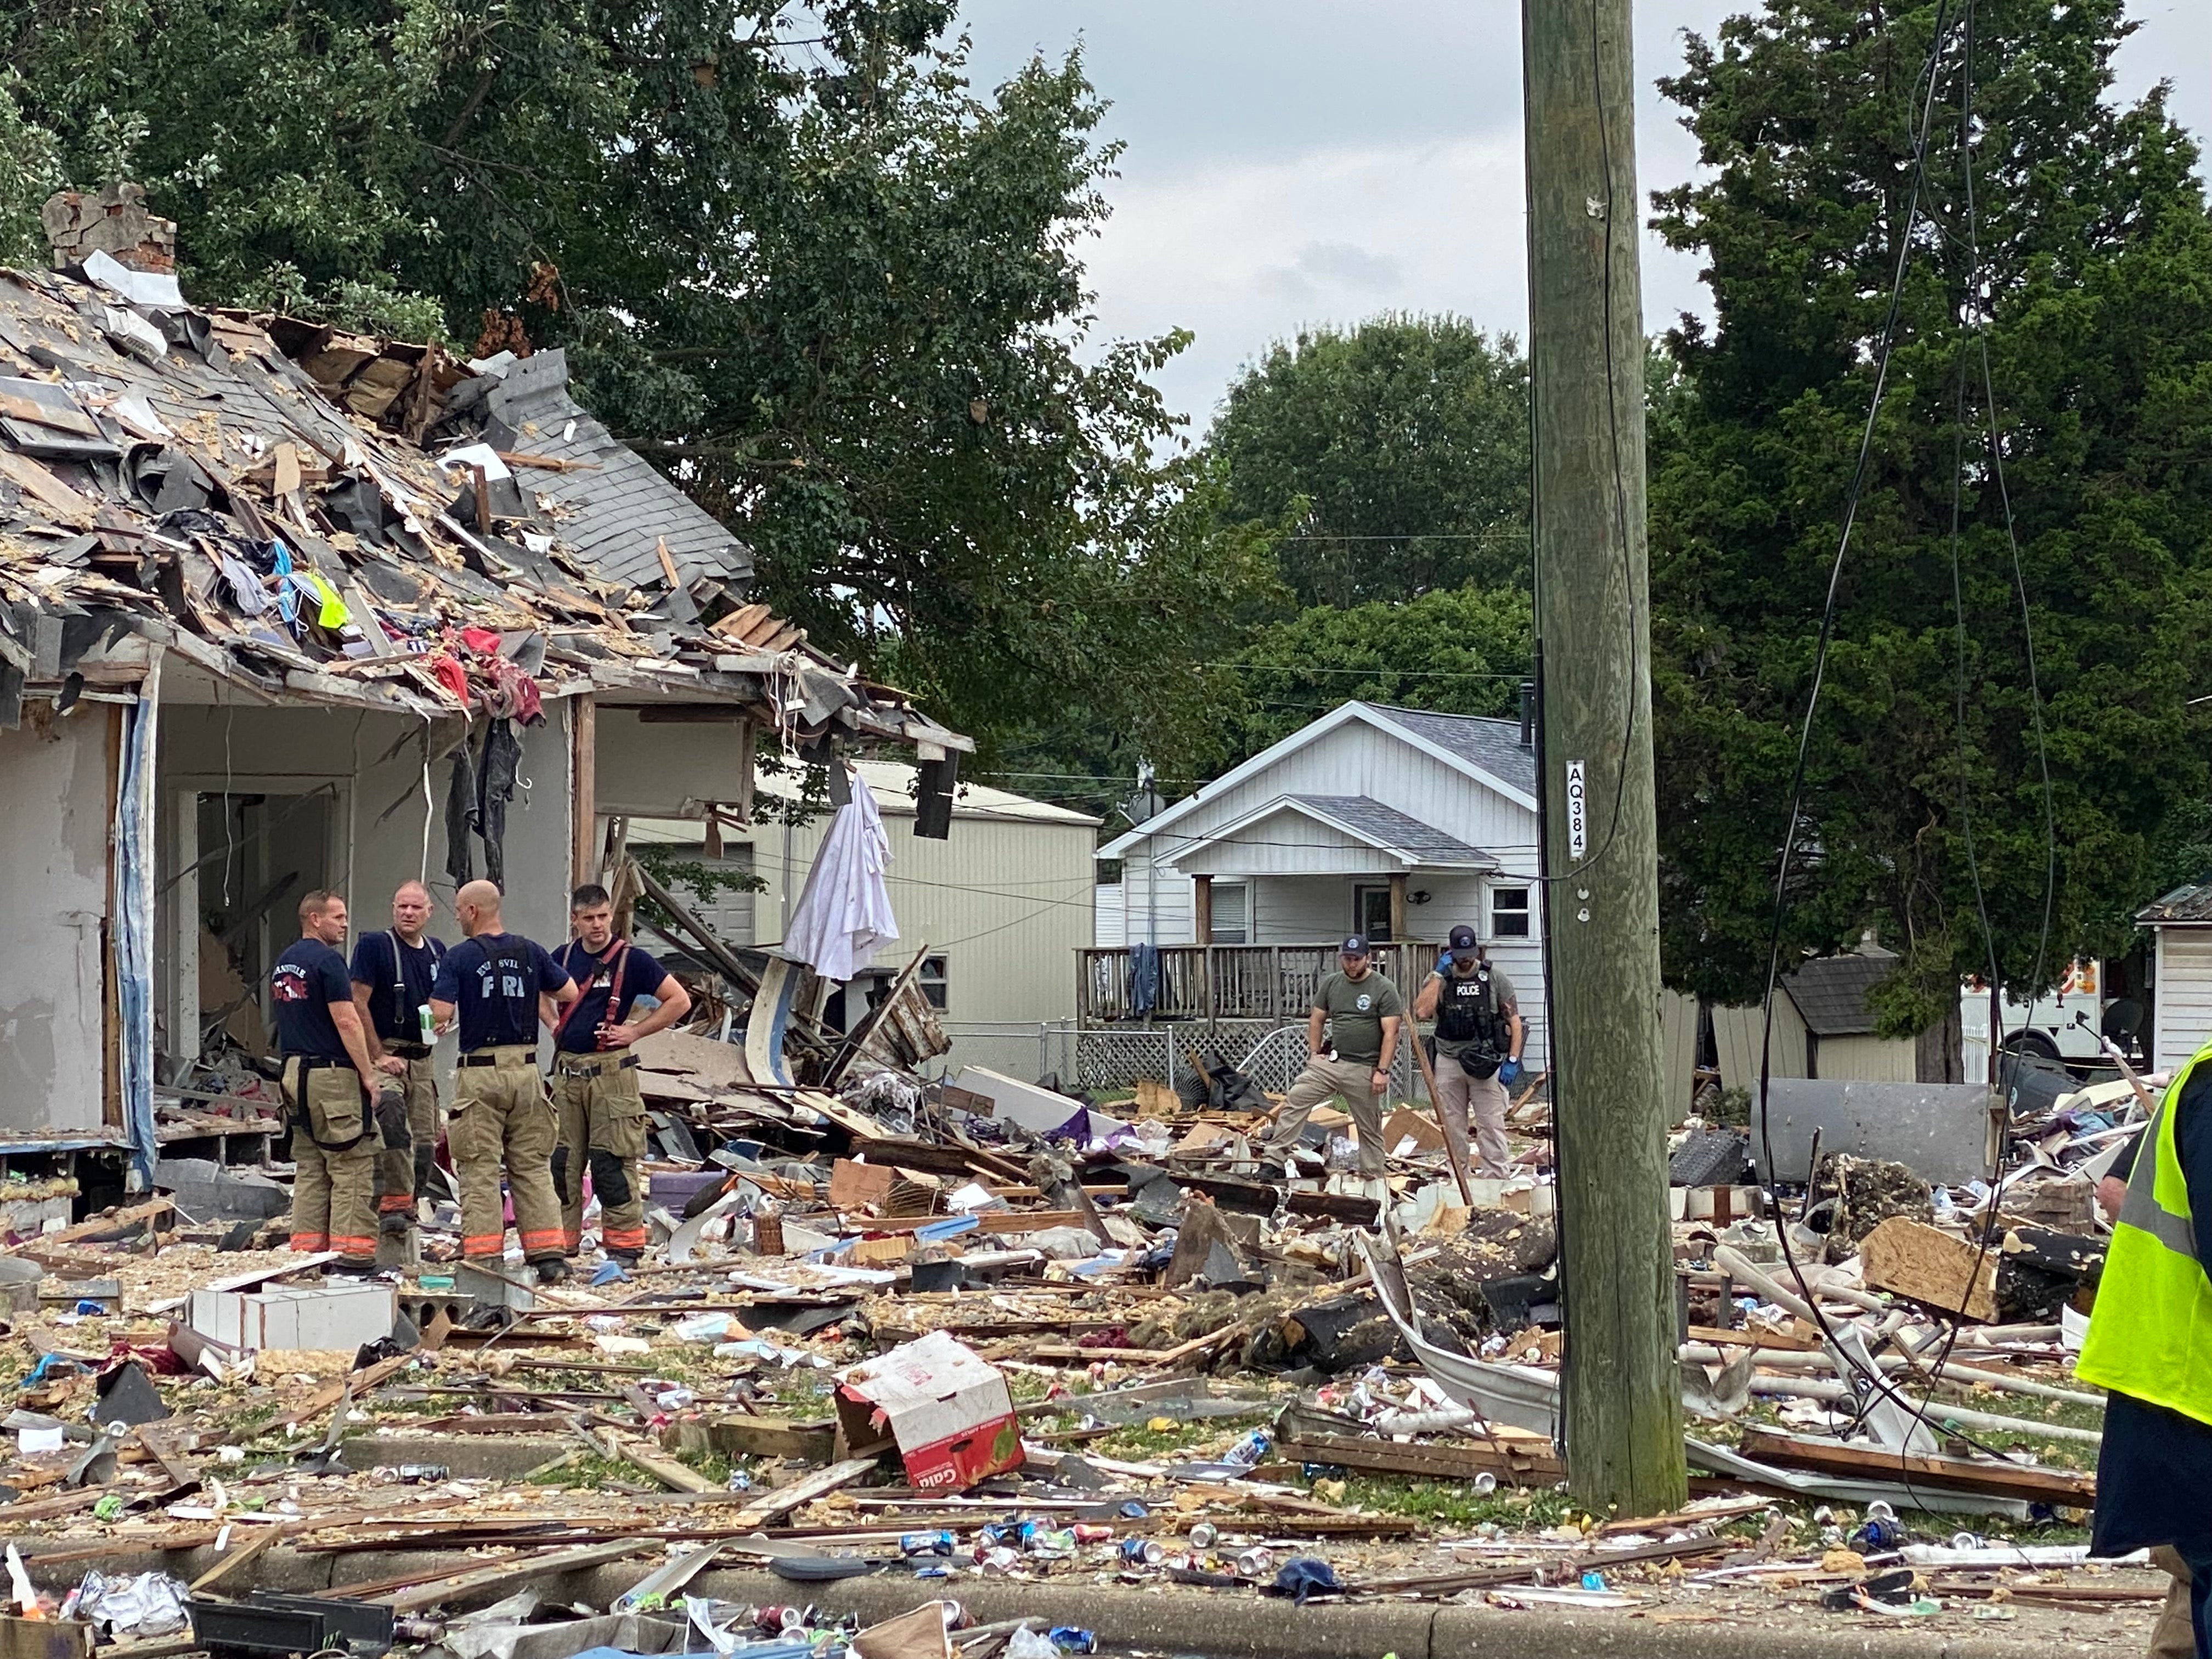 The site of the explosion in Evansville